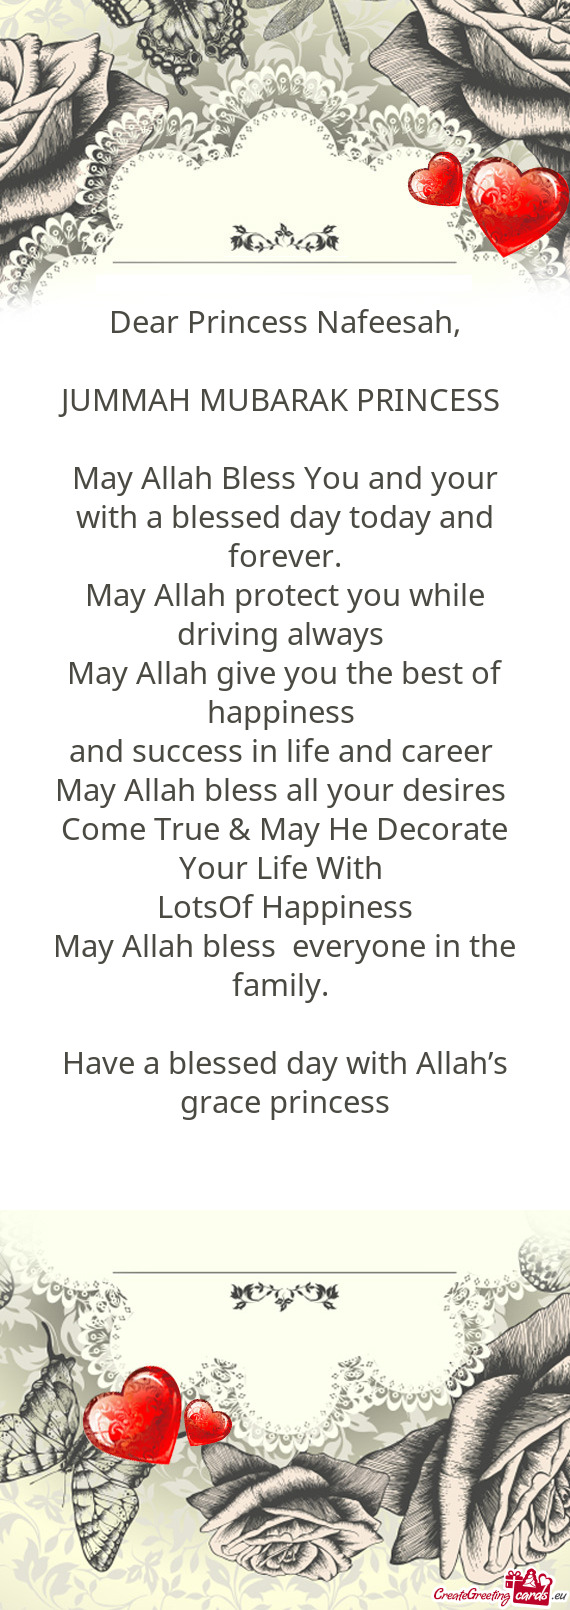 May Allah Bless You and your with a blessed day today and forever